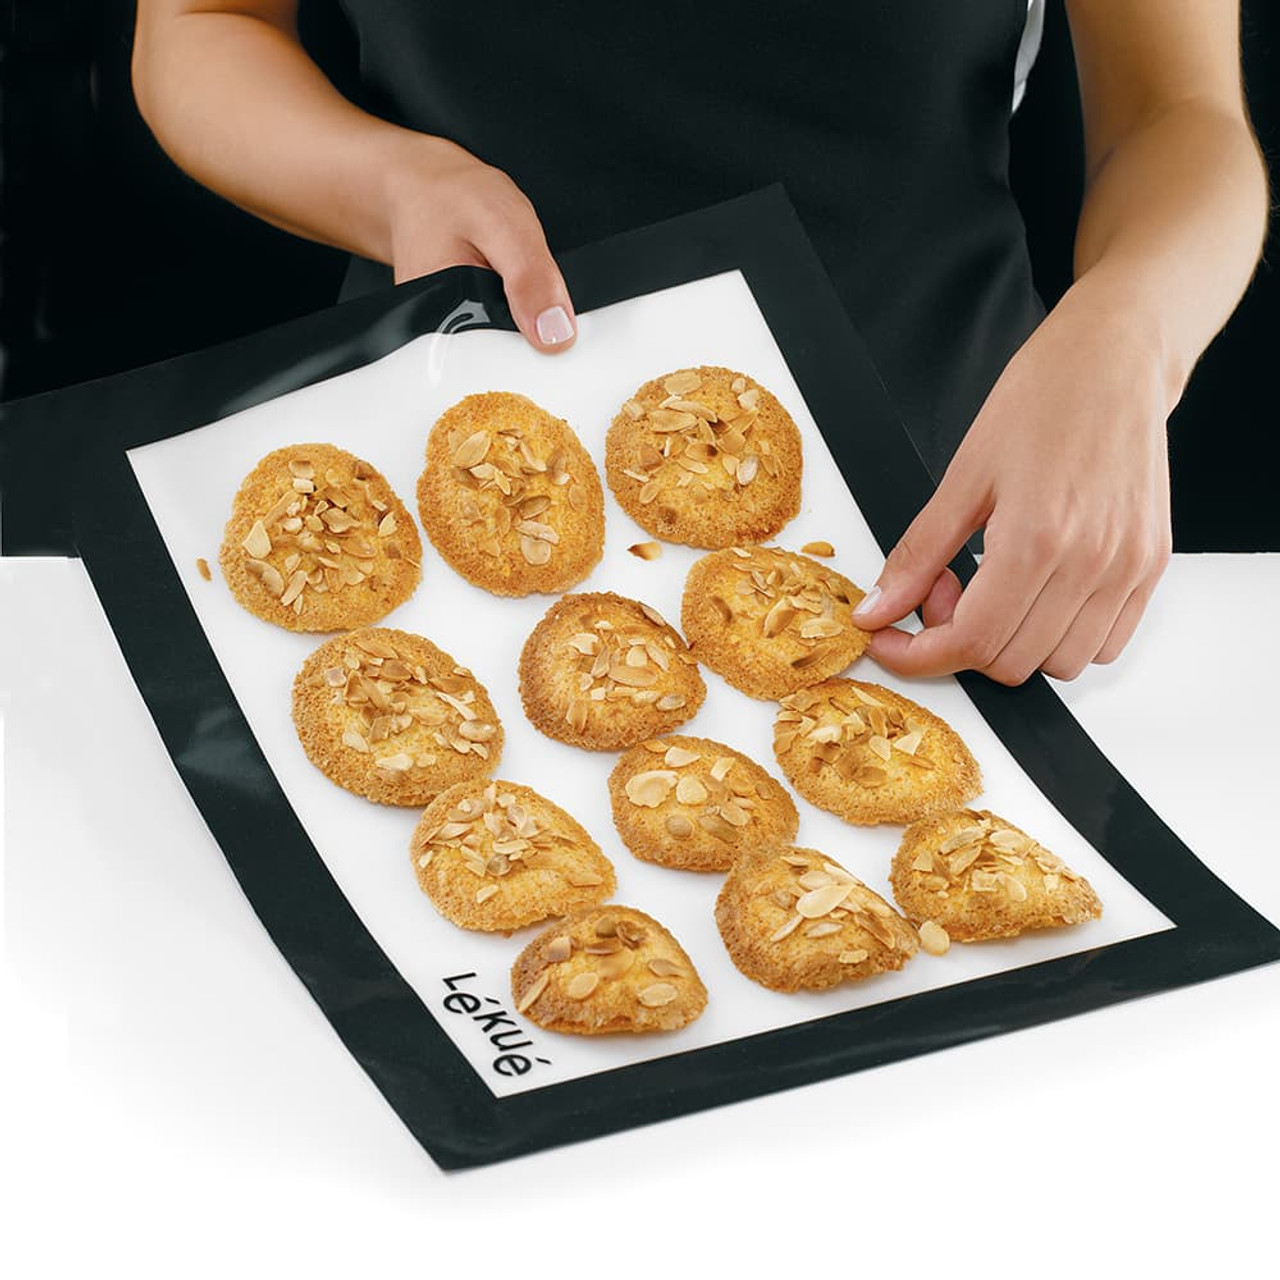 https://cdn11.bigcommerce.com/s-hccytny0od/images/stencil/1280x1280/products/3871/14066/lekue-silicone-baking-mat-2__98173.1610884539.jpg?c=2?imbypass=on